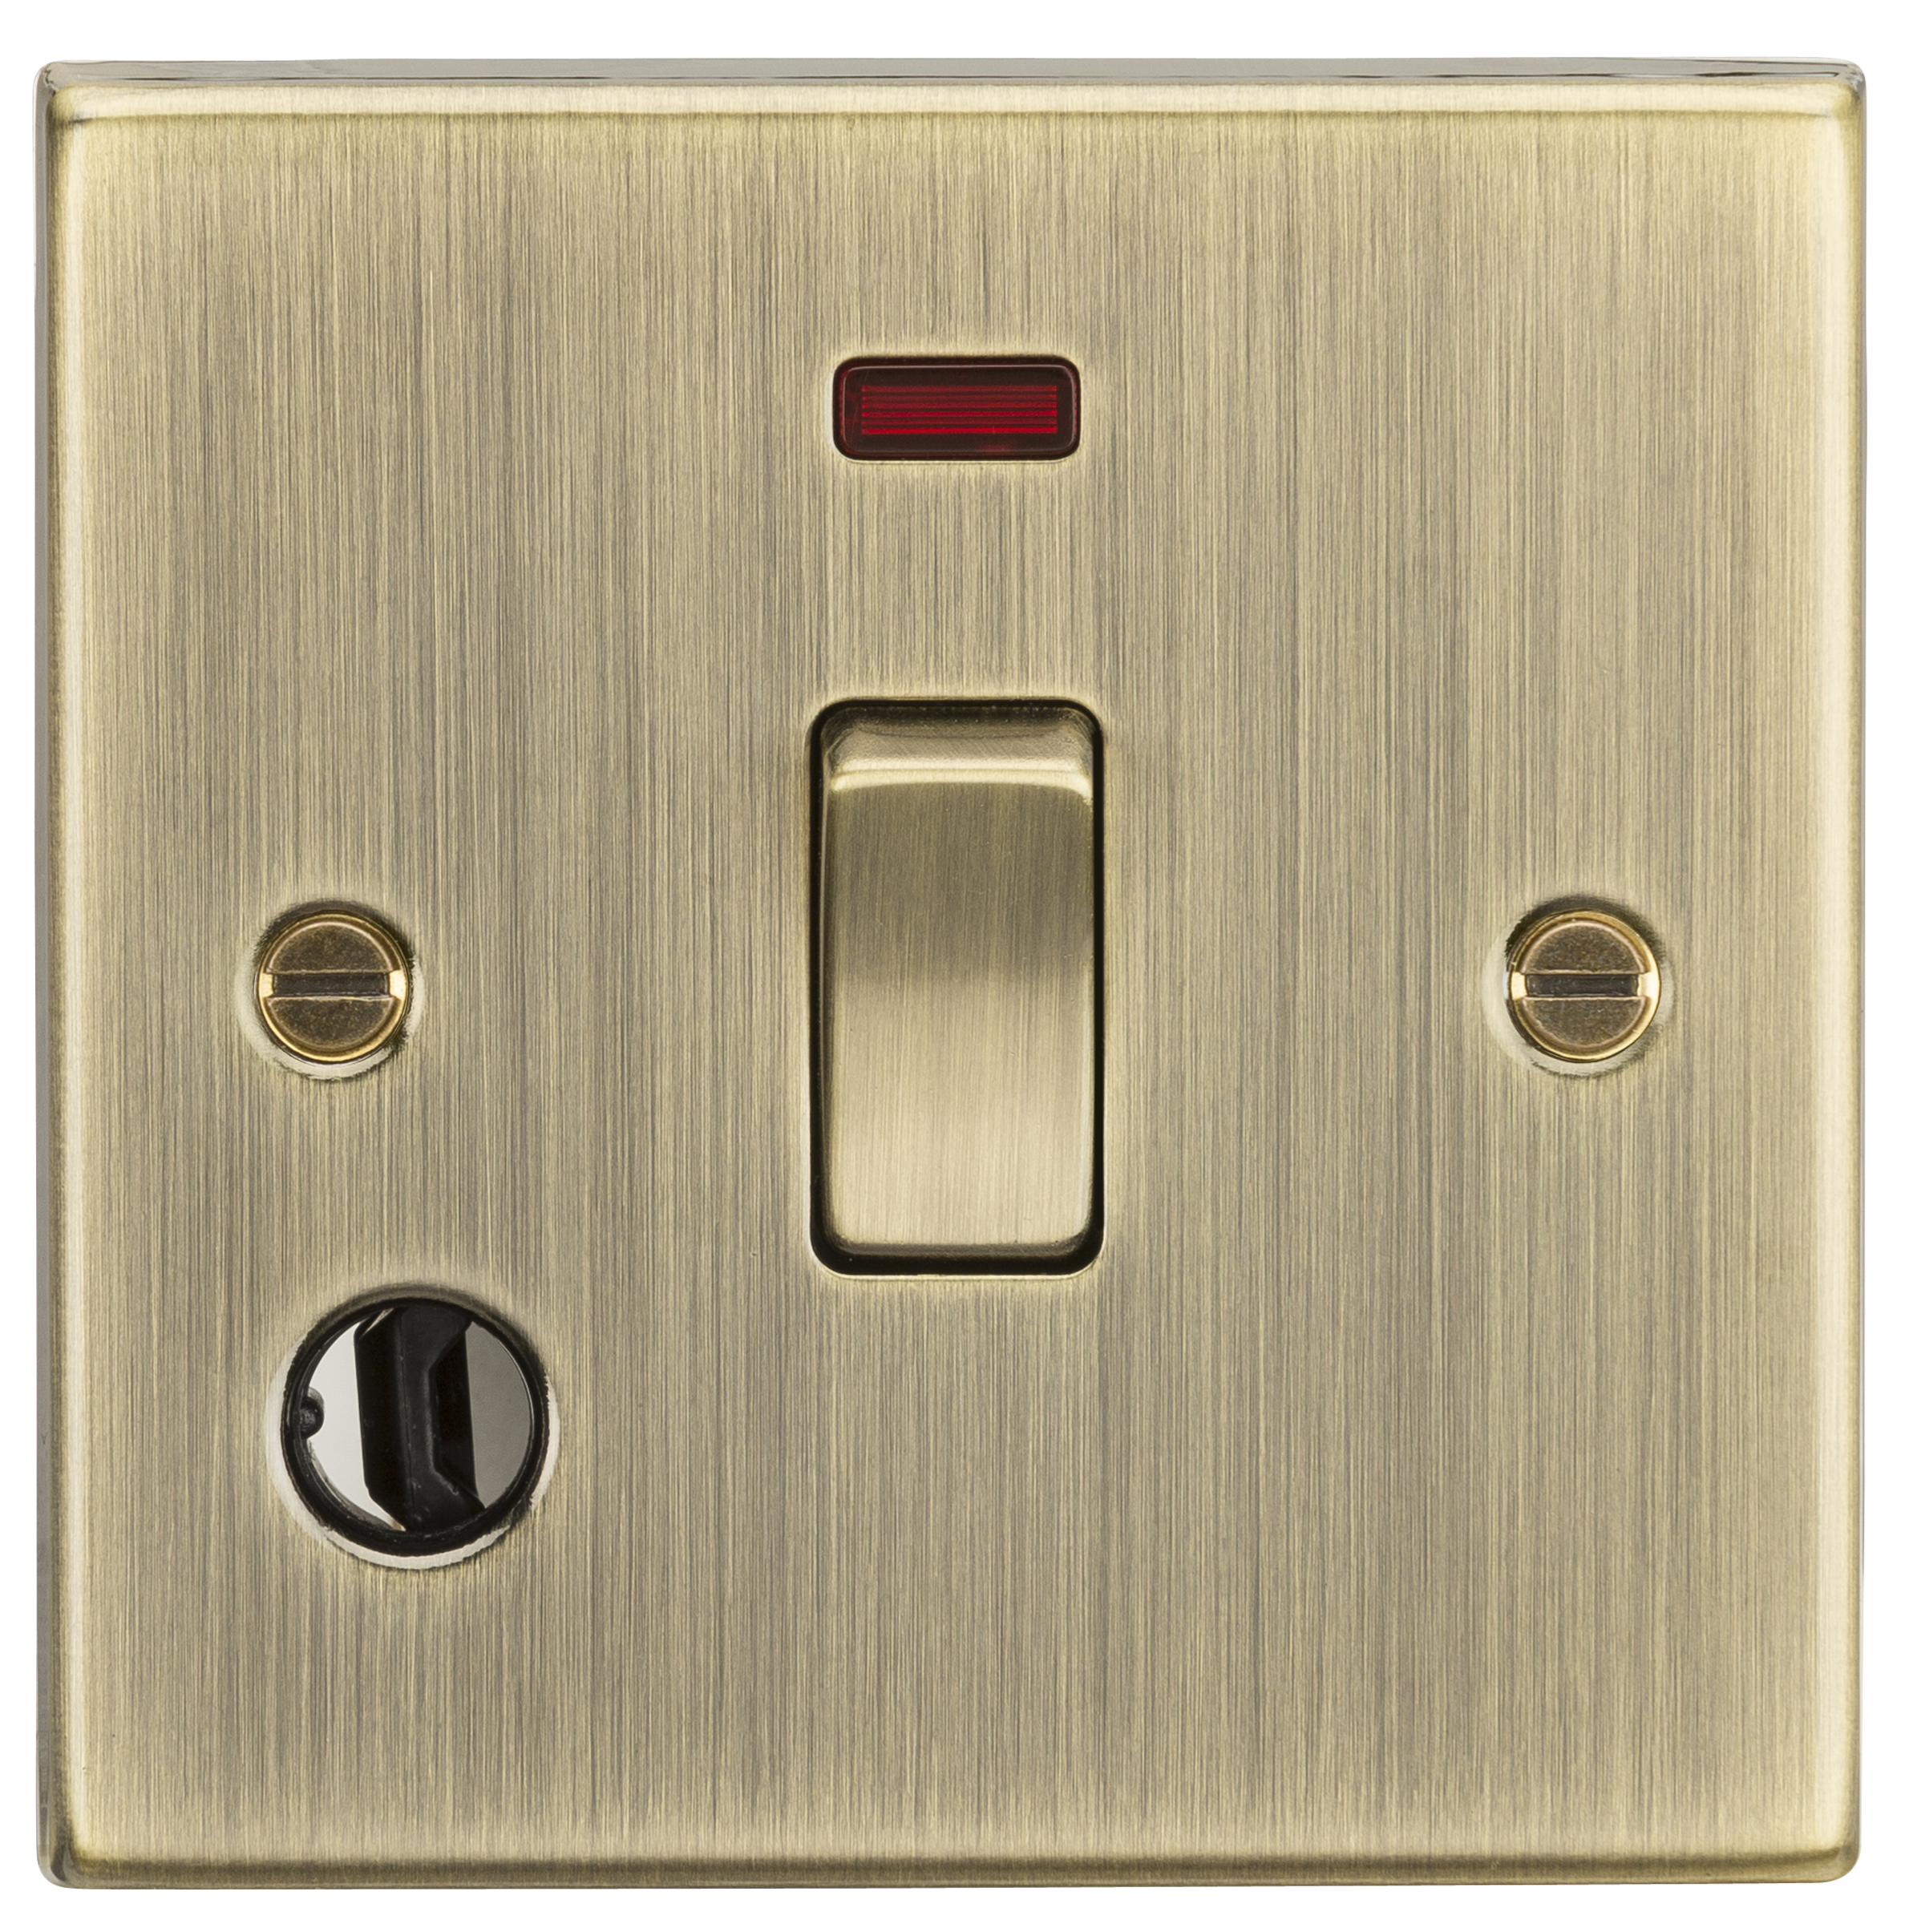 20A 1G DP Switch With Neon & Flex Outlet - Square Edge Antique Brass - CS834FAB 